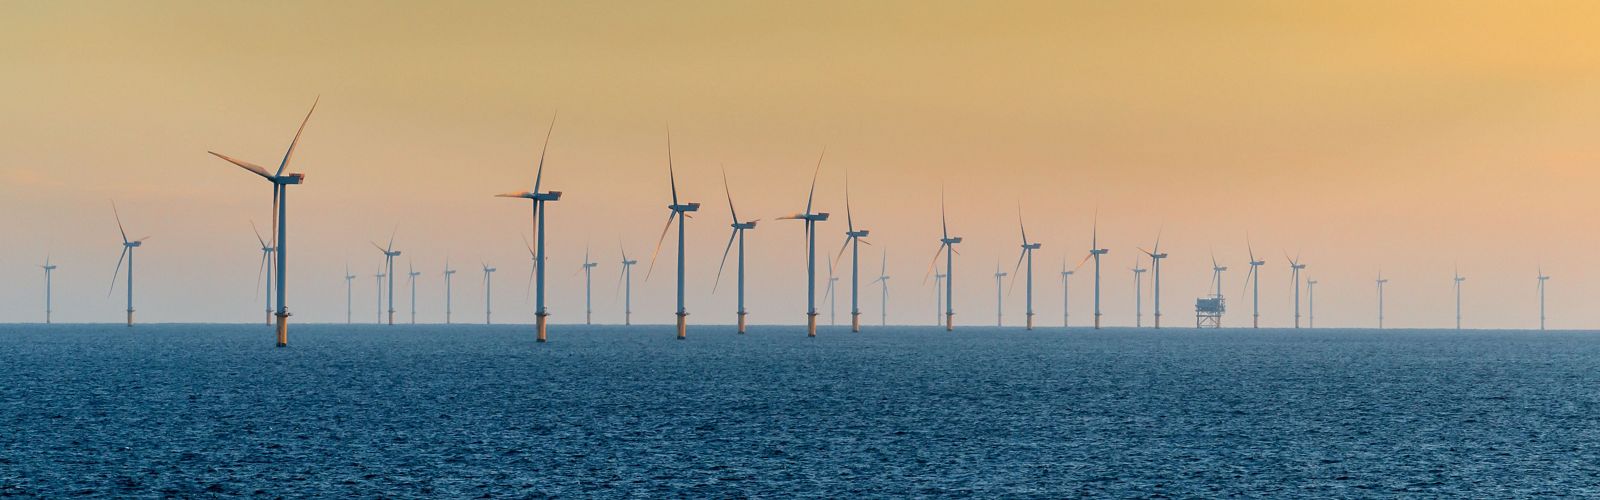 The sun sets over an ocean with several wind turbines.